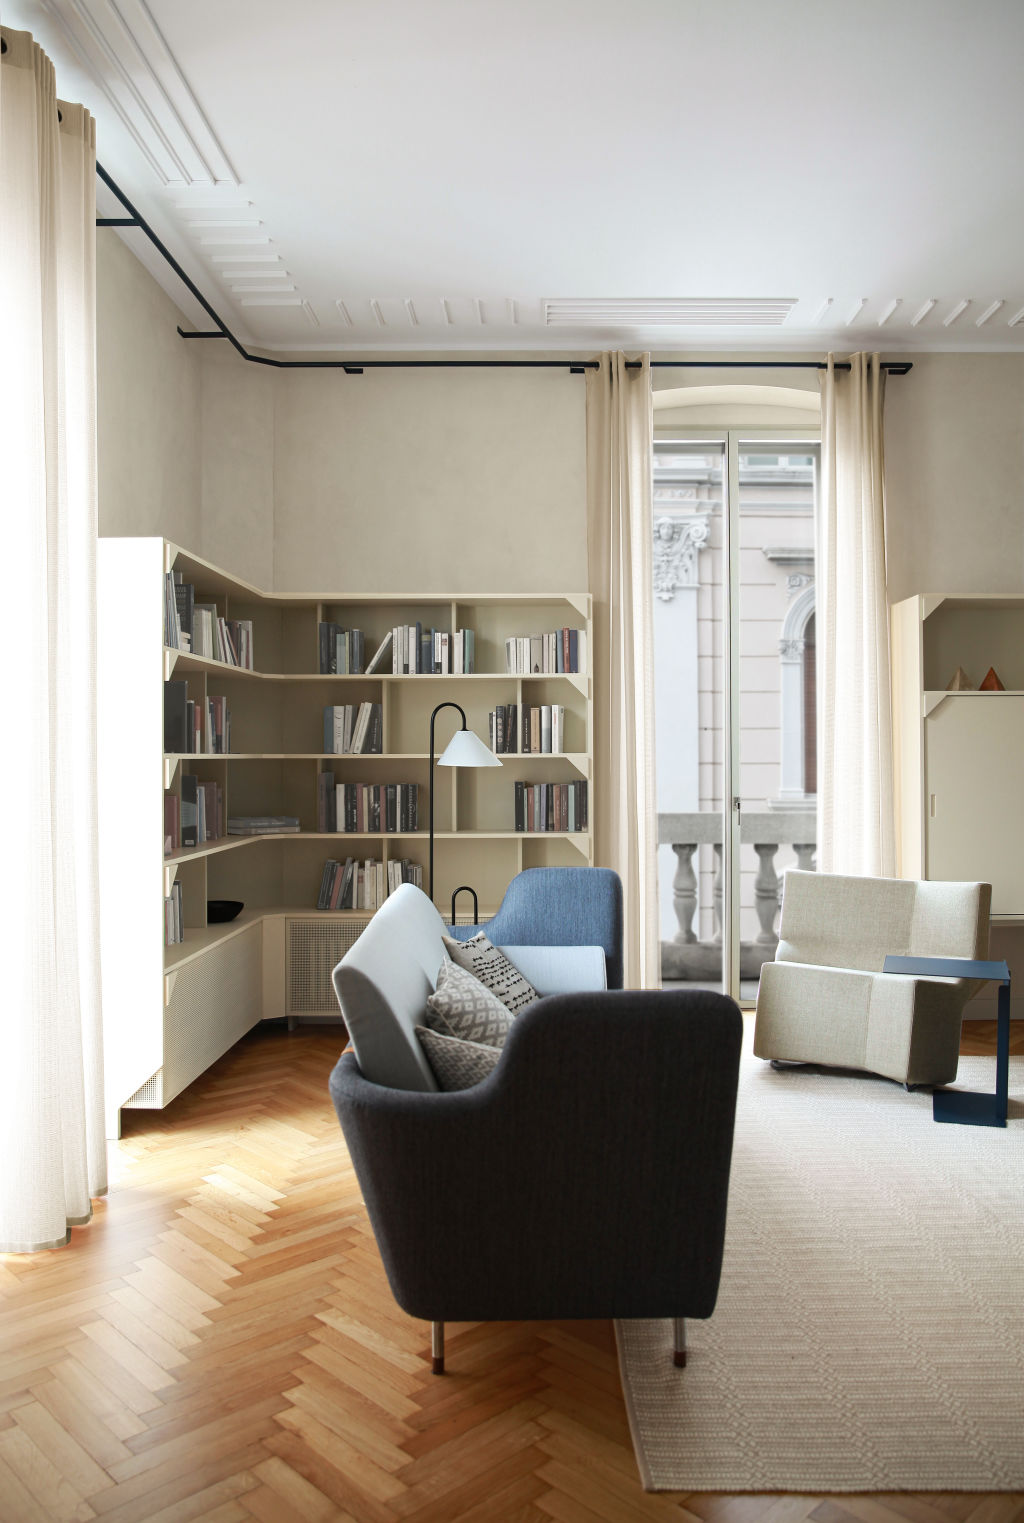 The apartment’s ceilings have been specially designed. Photo: Carola Ripamonti